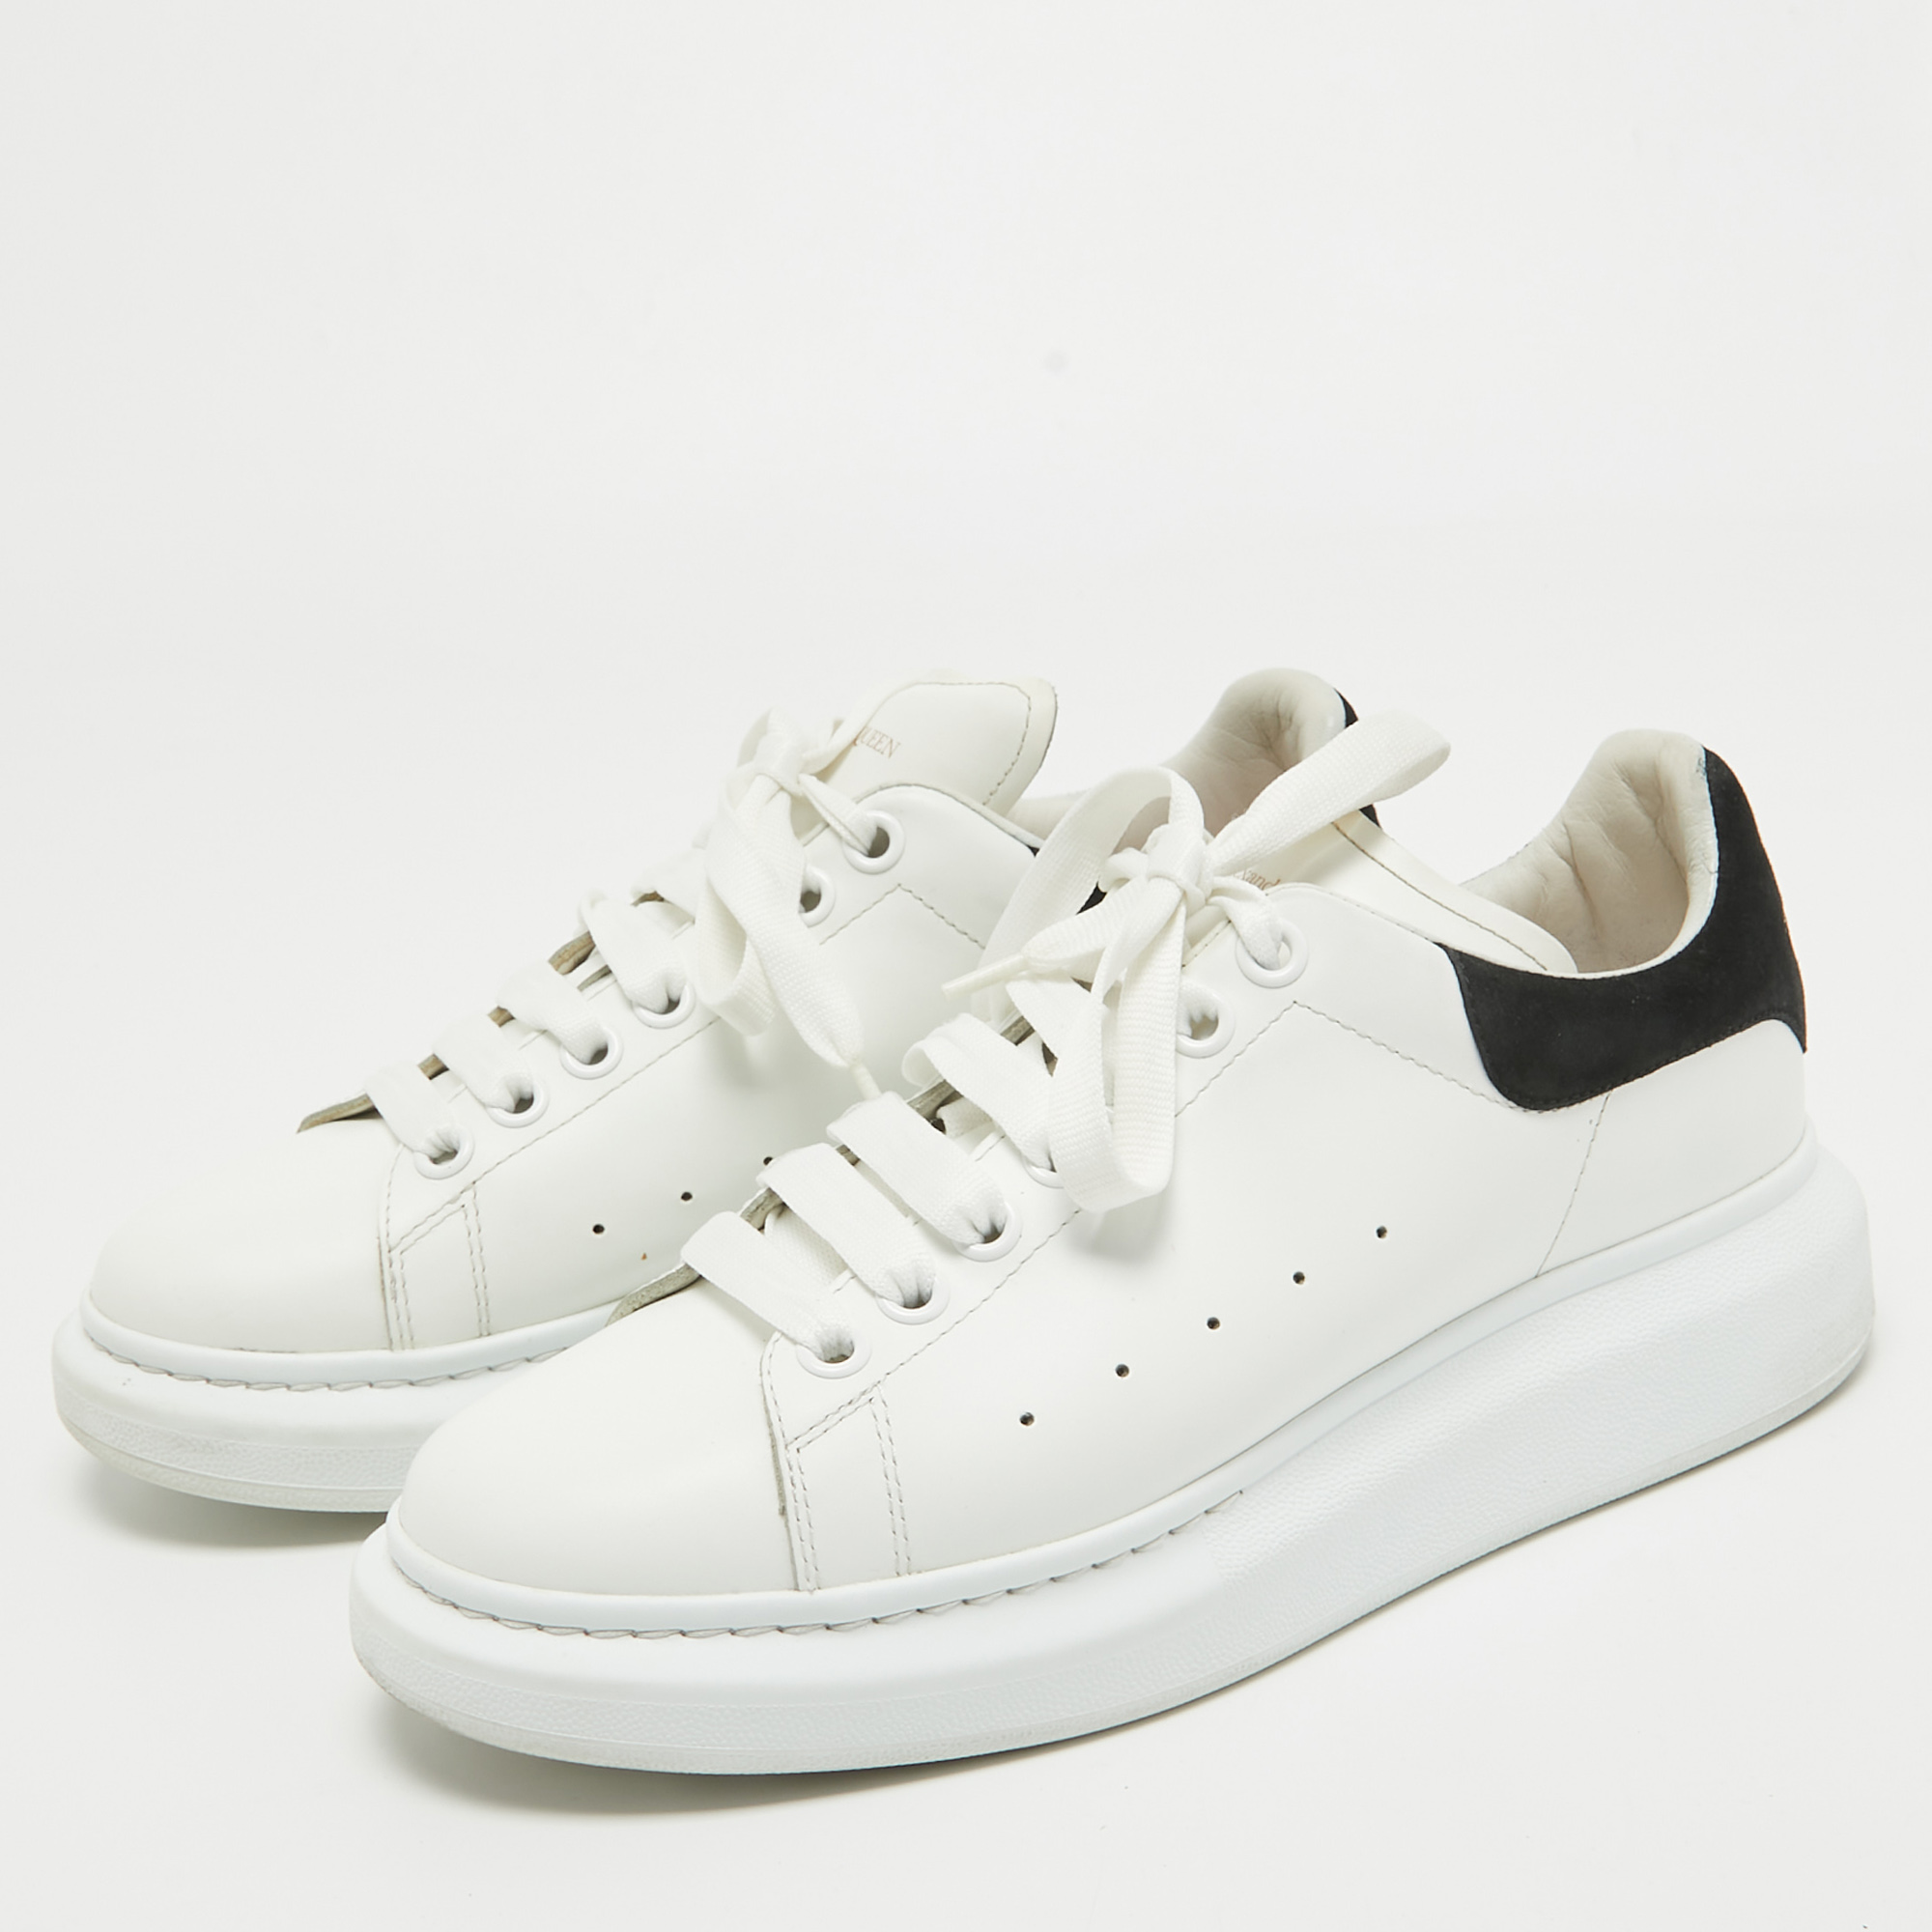 

Alexander McQueen White Leather Larry Low Top Sneakers Size